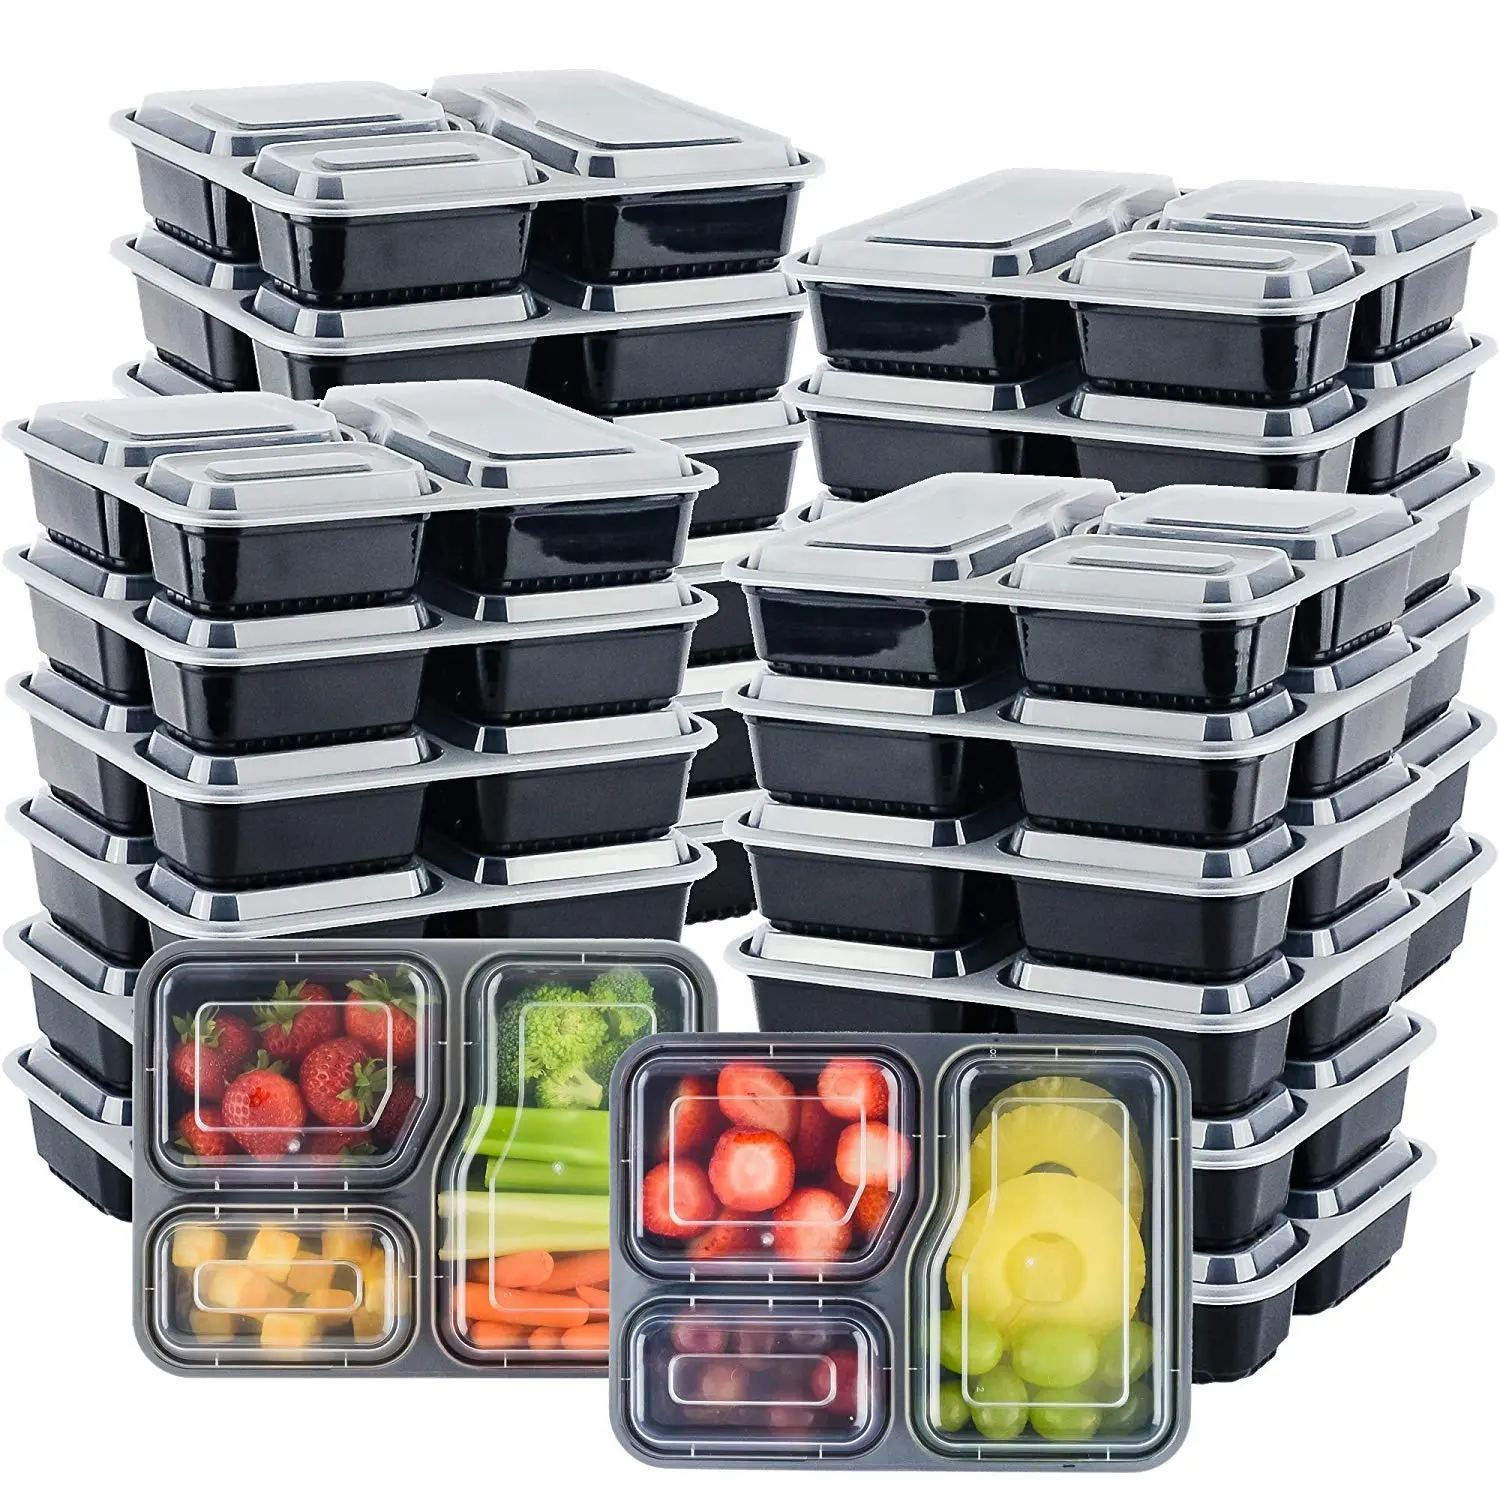 Disposable Reusable Lunch Boxes Meal Prep Container 3 Compartment Food Storage Bento Box